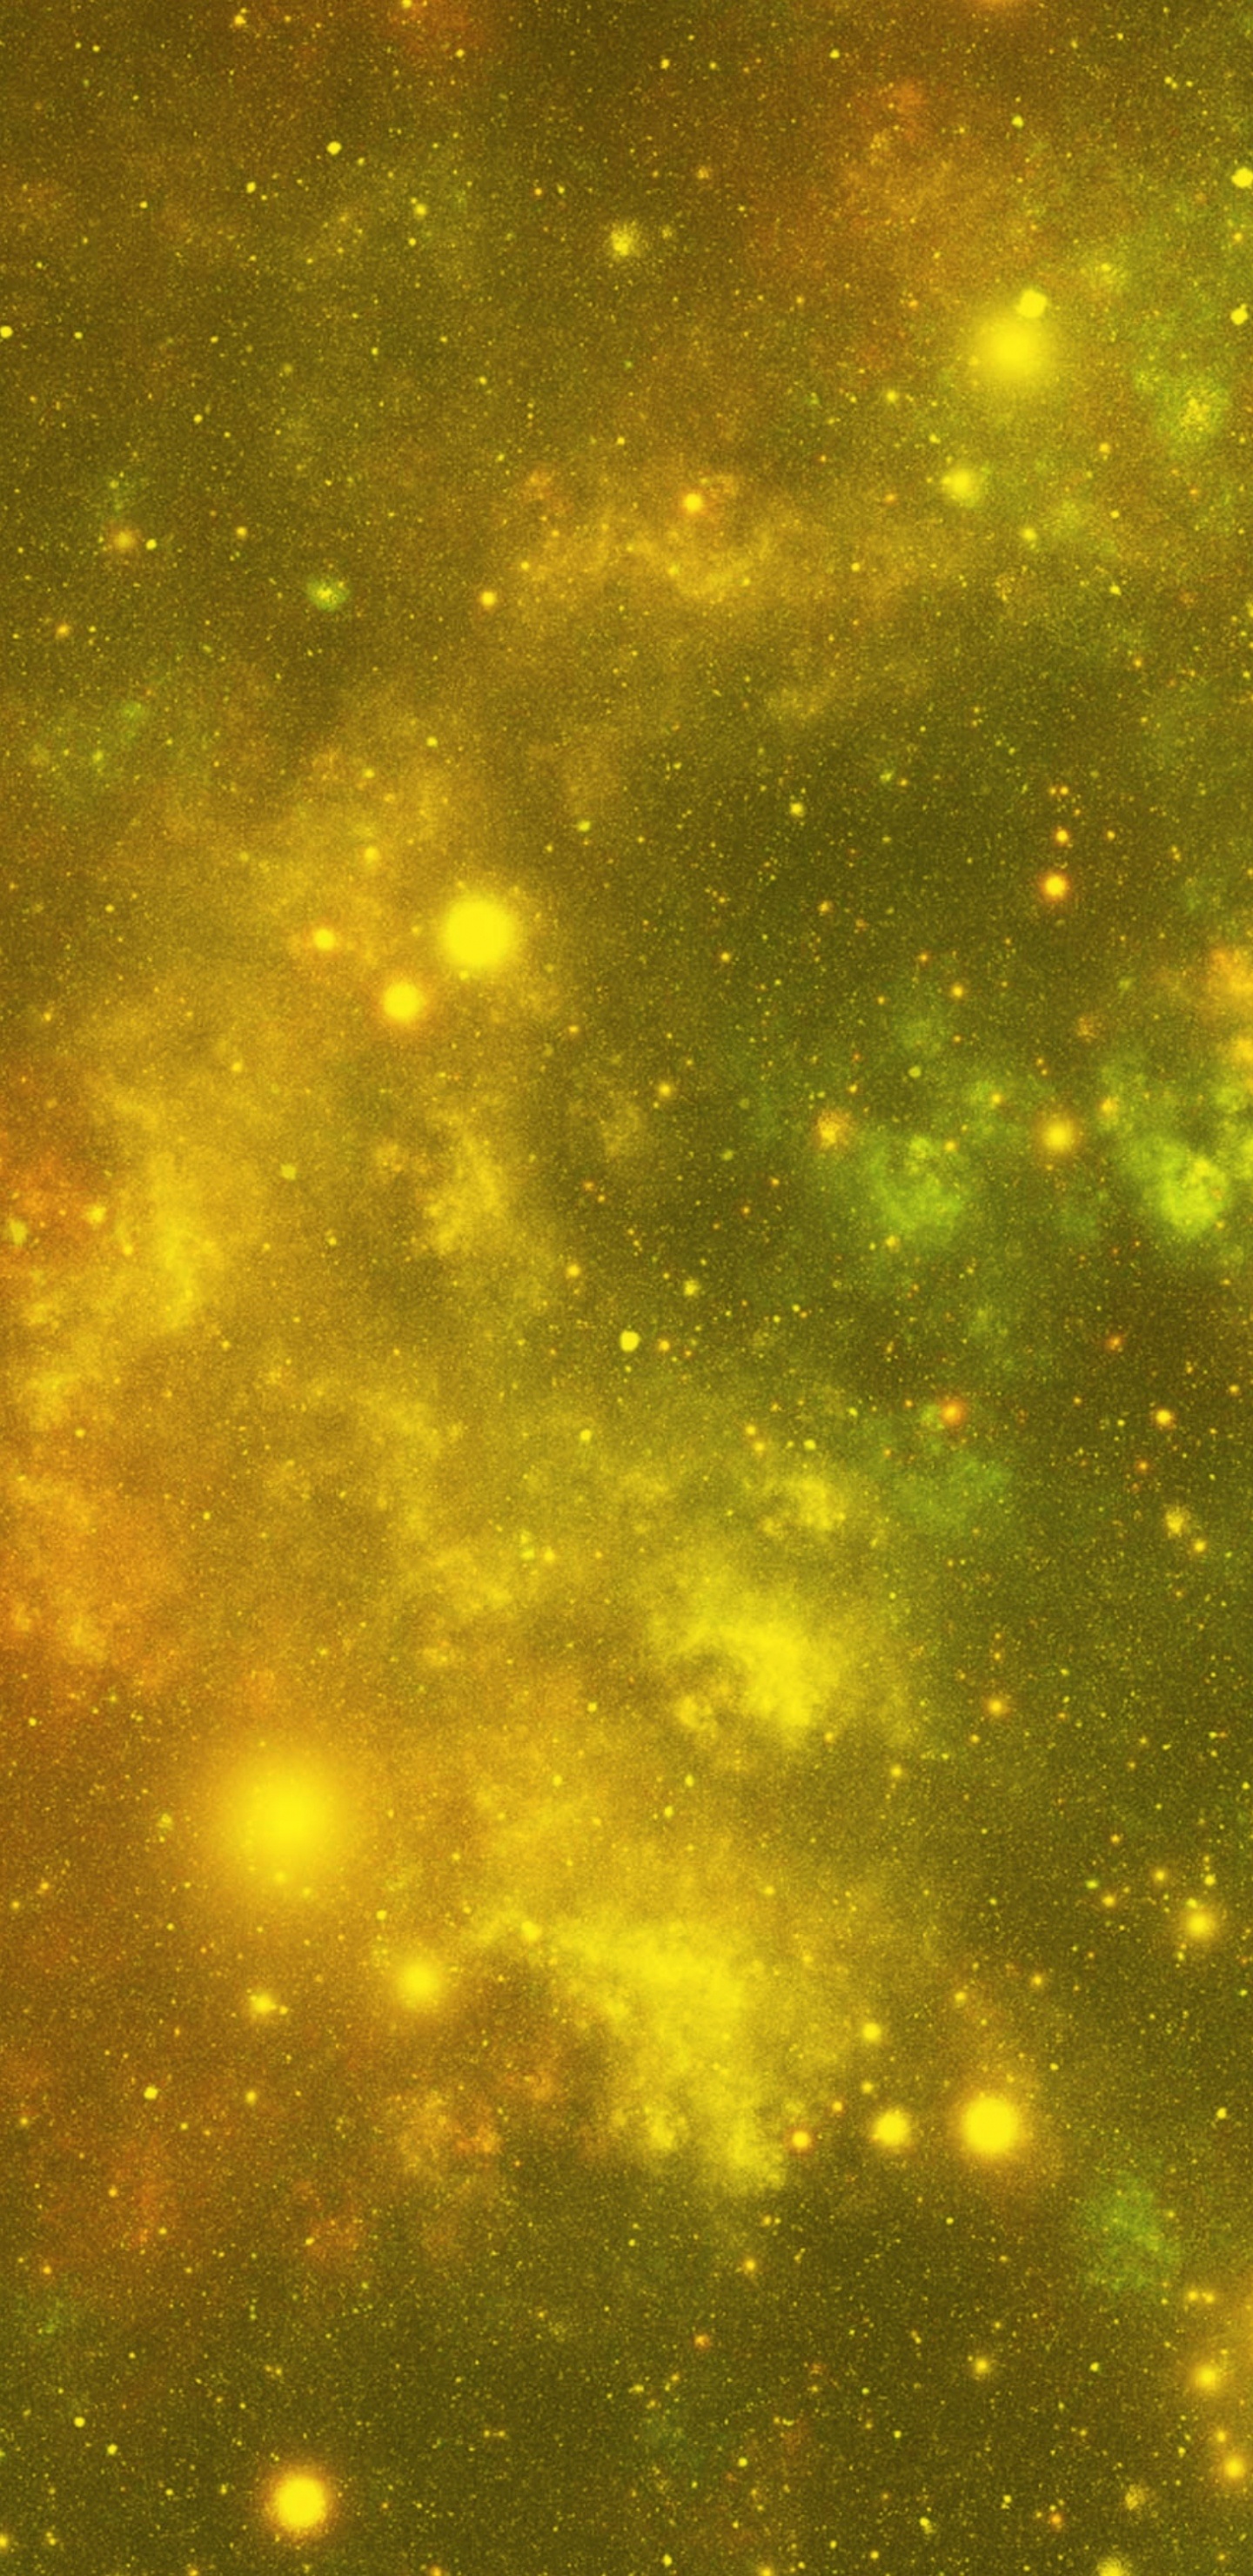 Green and Yellow Stars in The Sky. Wallpaper in 1440x2960 Resolution